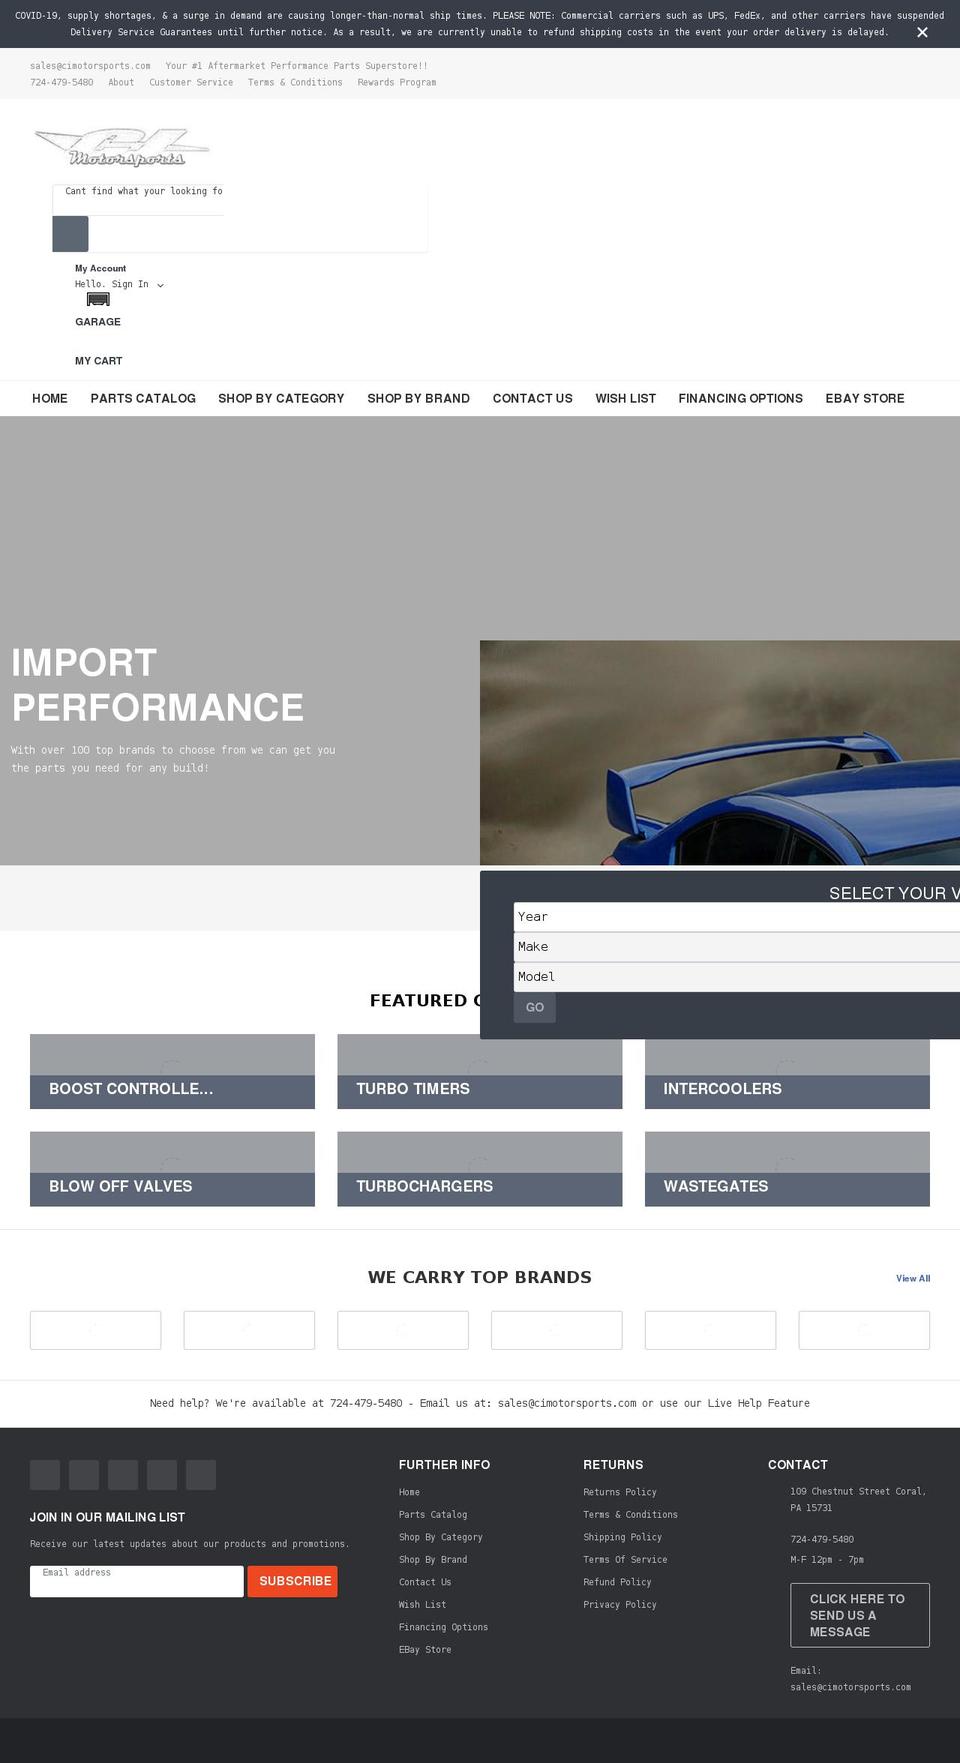 MAX Shopify theme site example cimotorsports.com